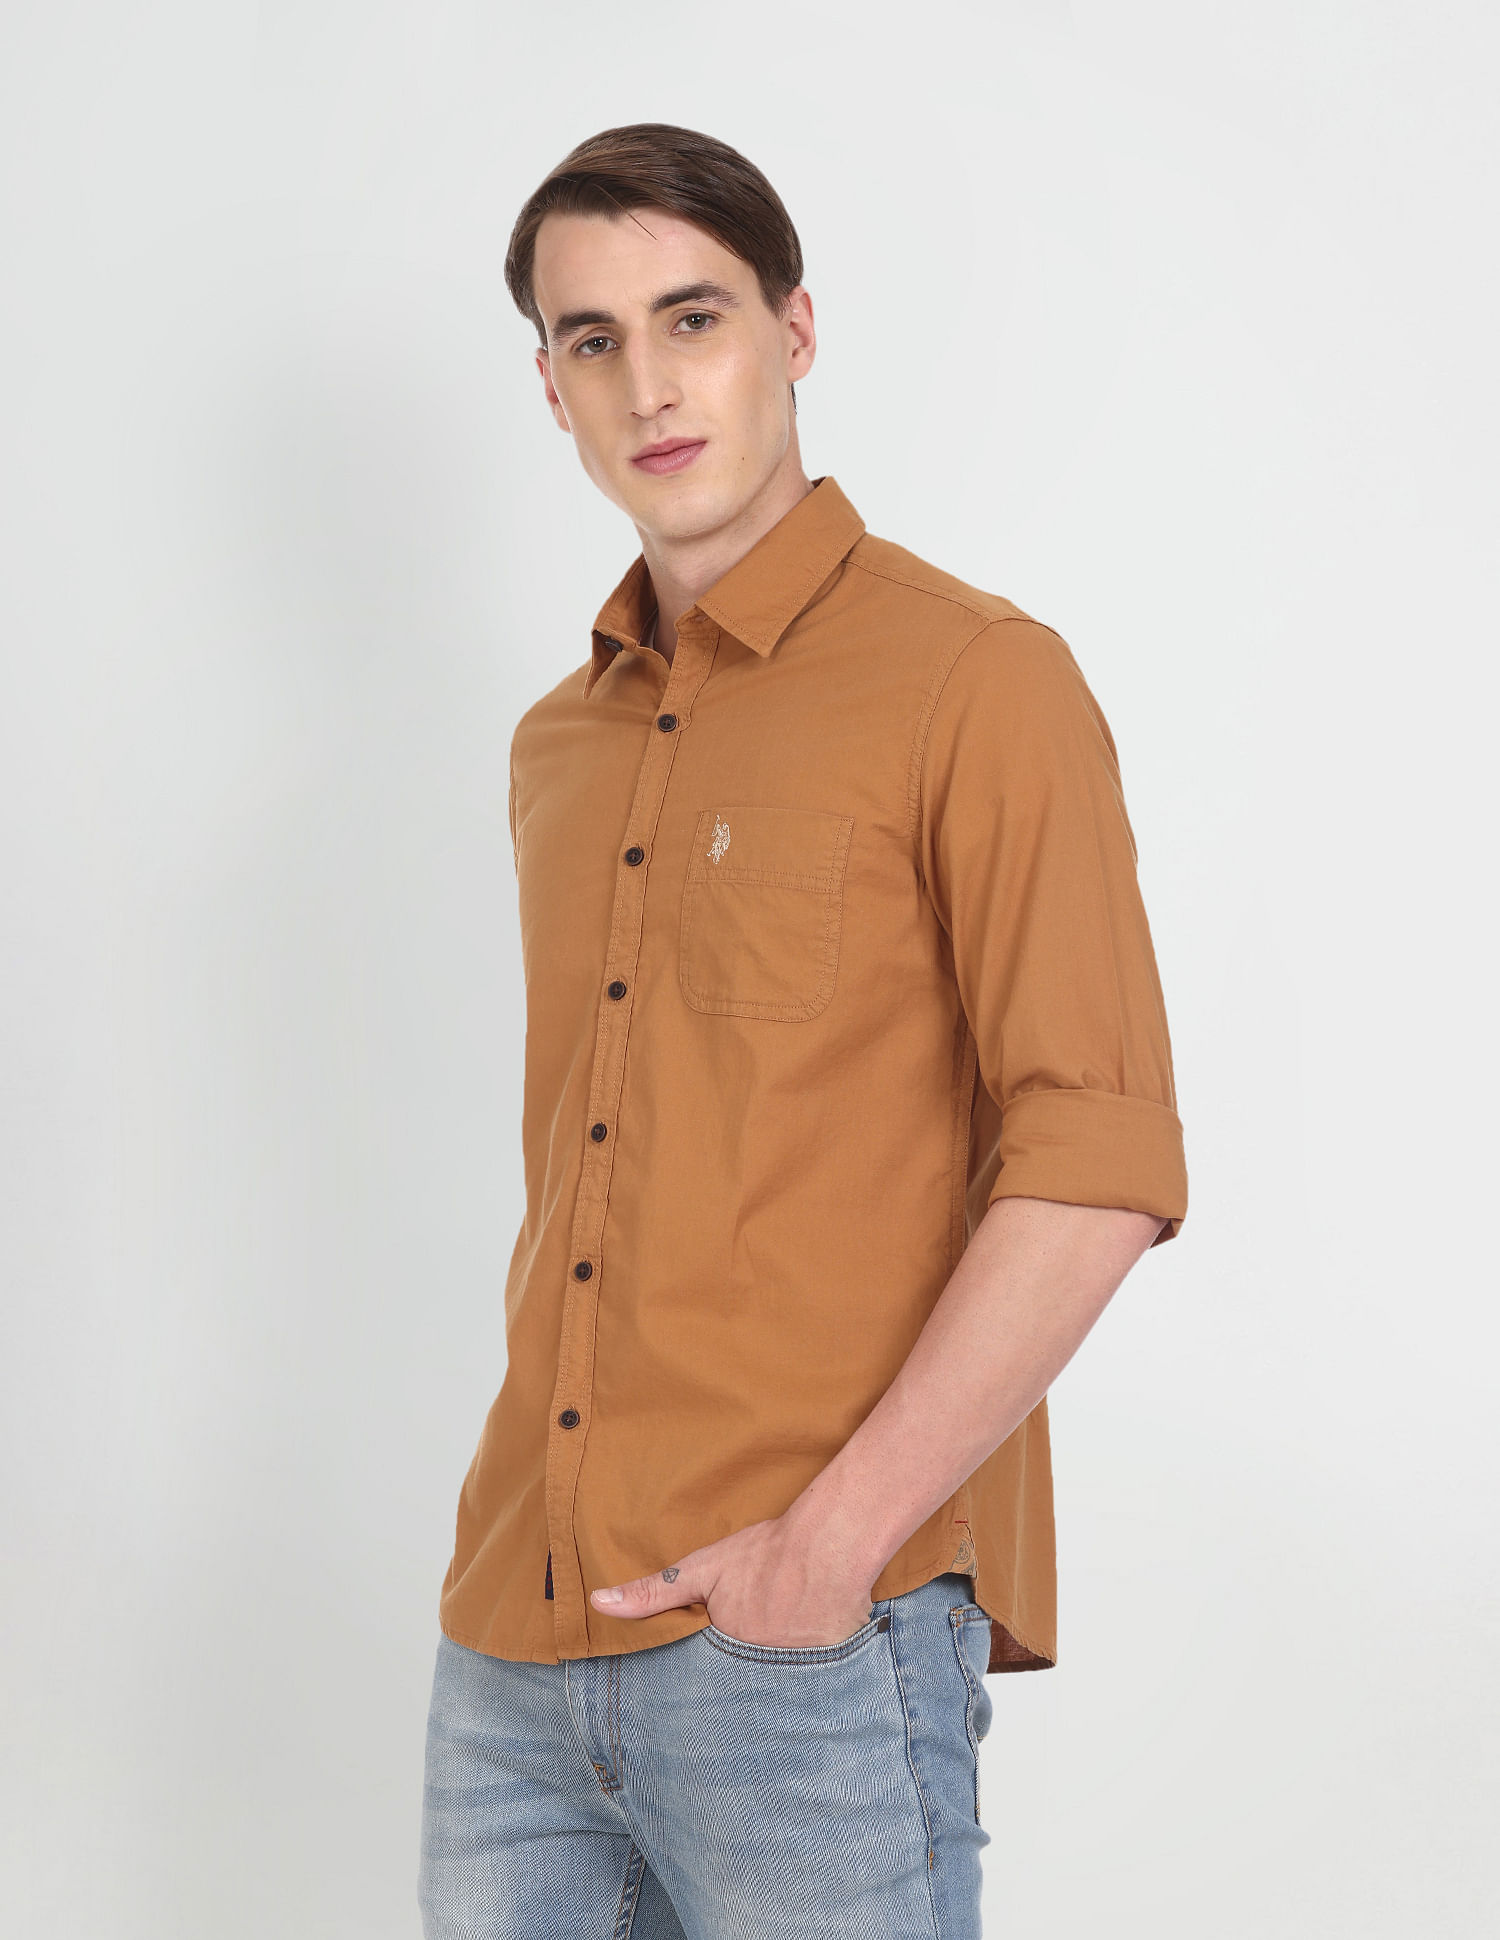 Brown Denim Shirts - Get Best Price from Manufacturers & Suppliers in India-calidas.vn